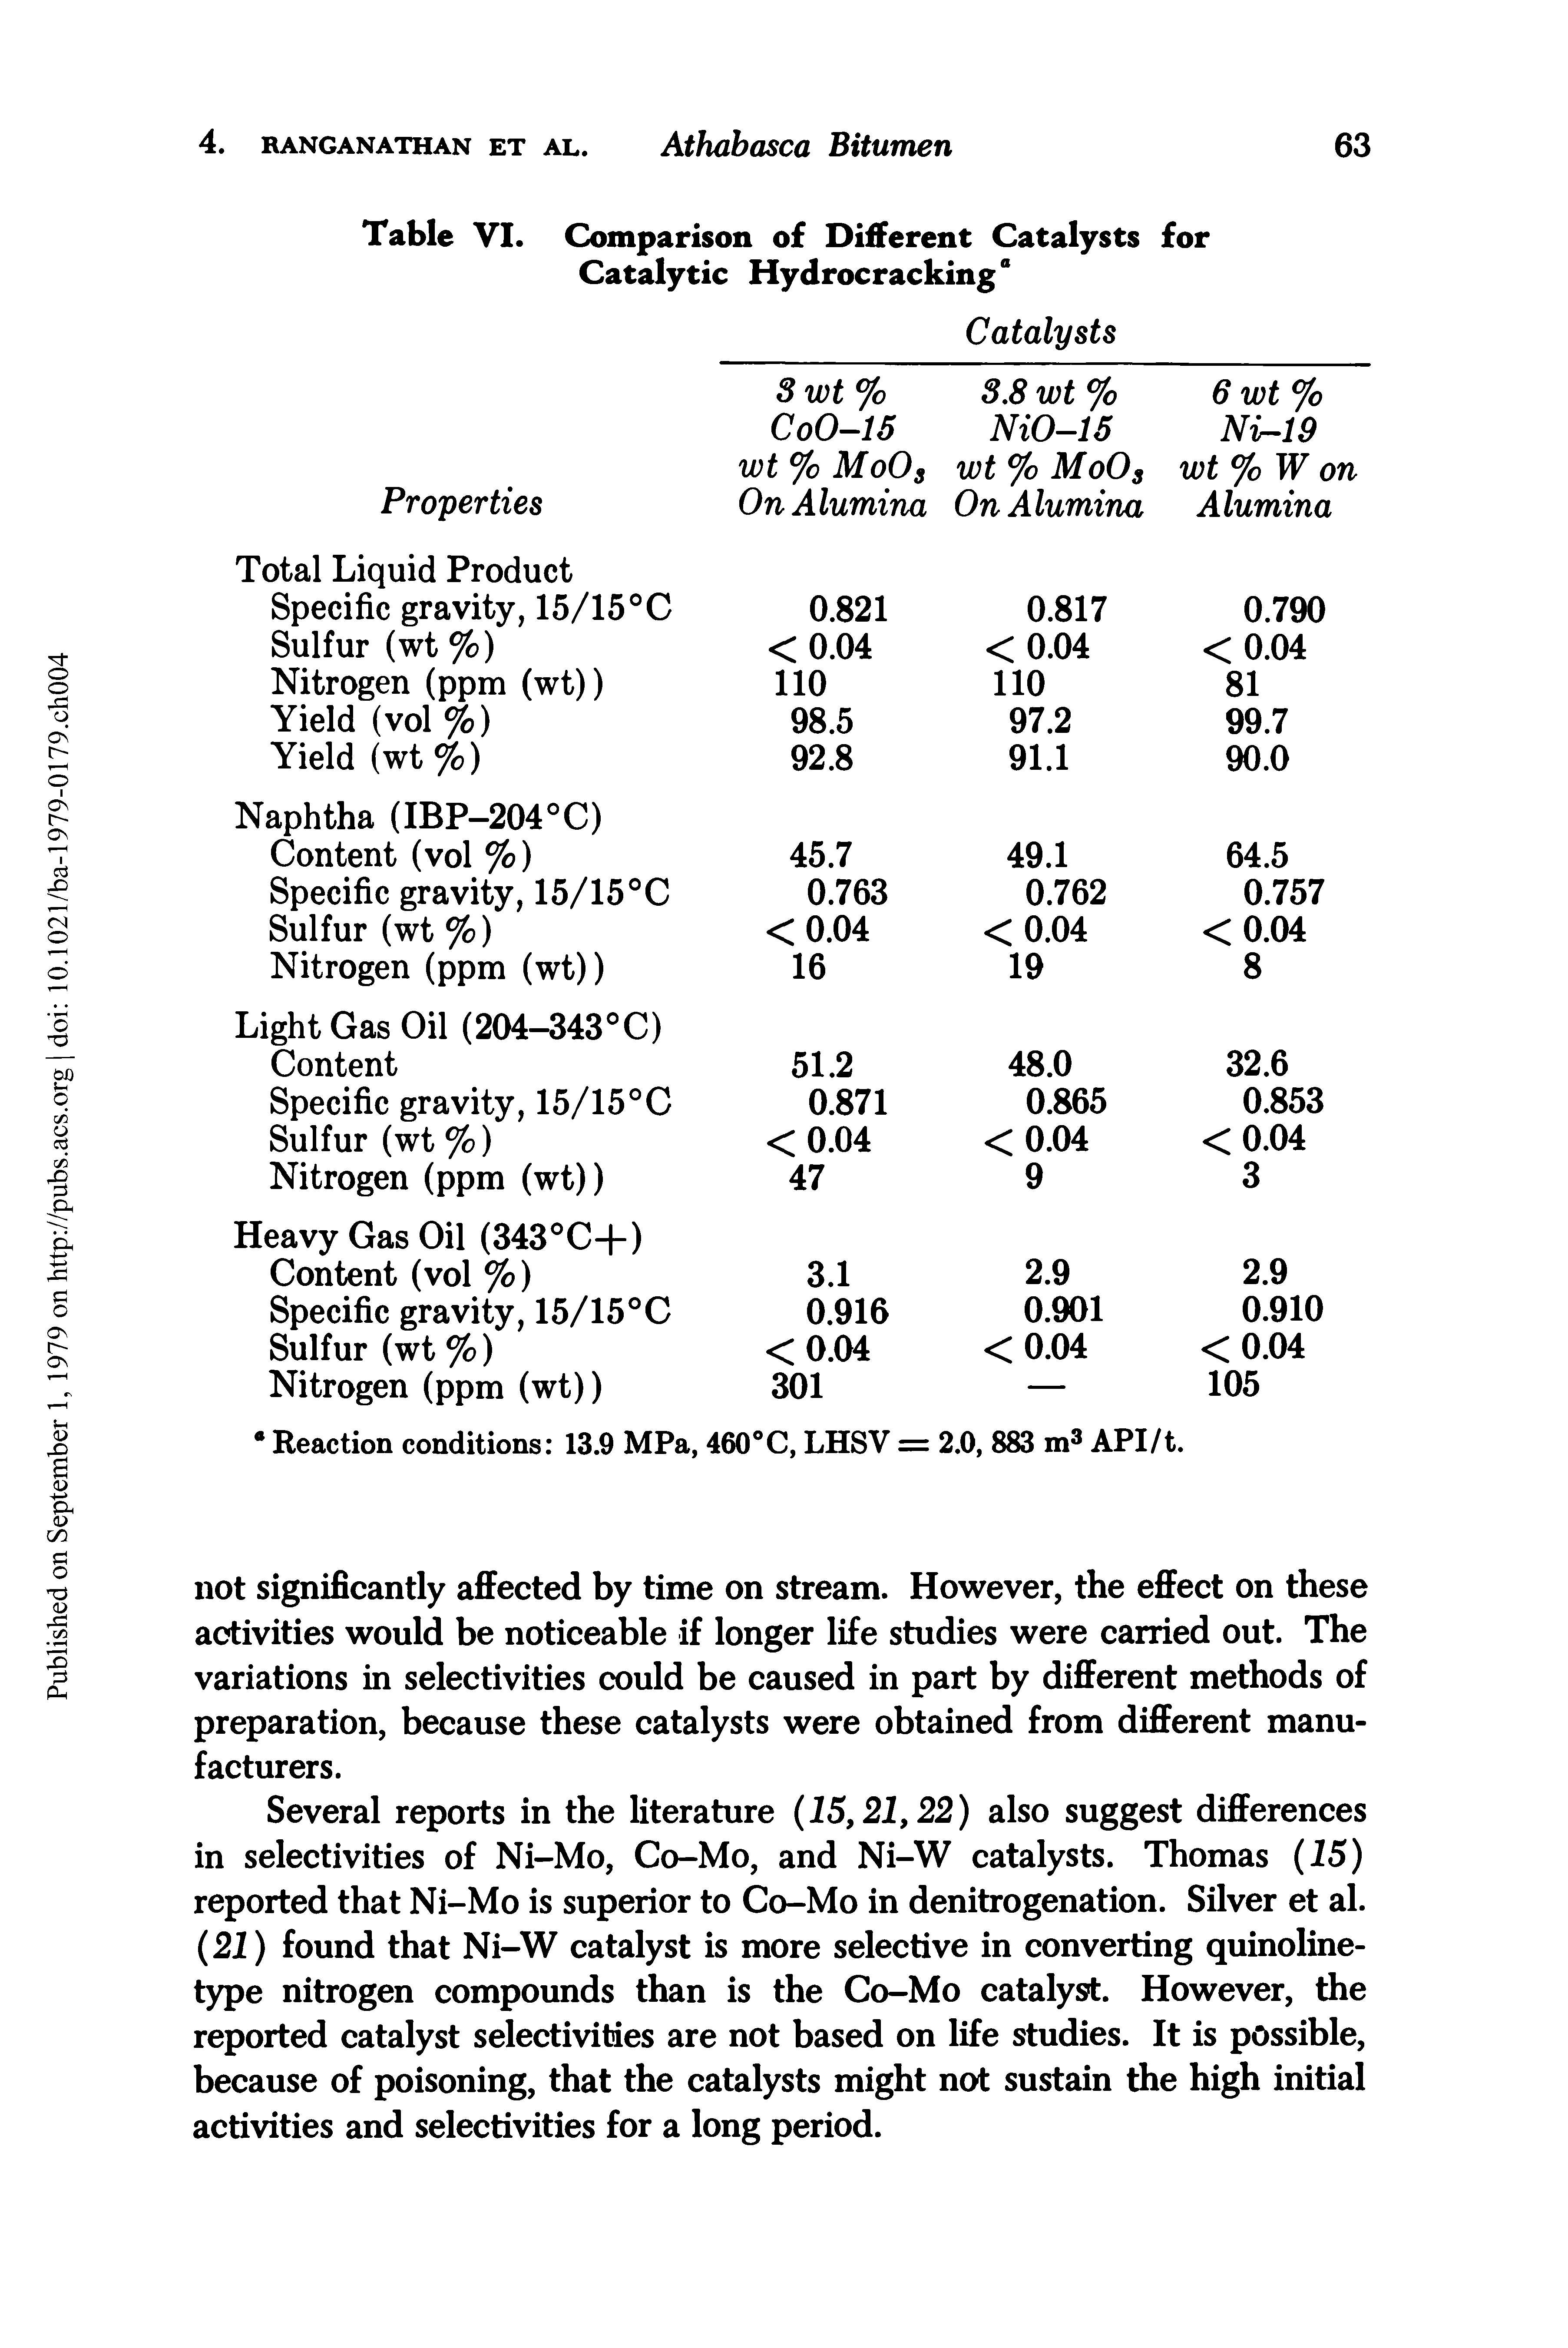 Table VI. Comparison of Different Catalysts for Catalytic Hydrocracking"...